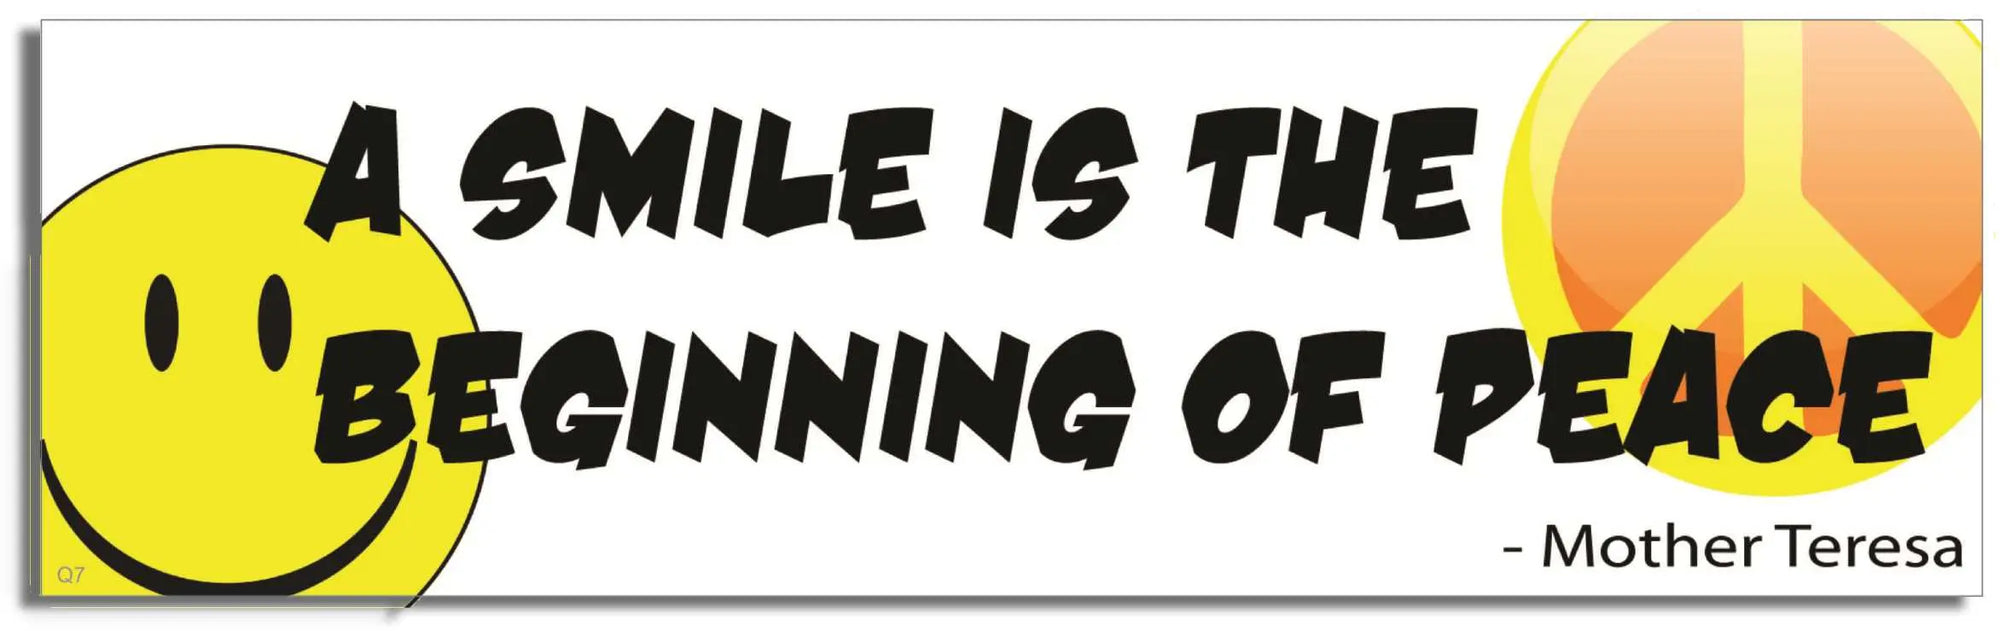 A smile is the beginning of peace - Mother Teresa - Quote Bumper Sticker, Car Magnet